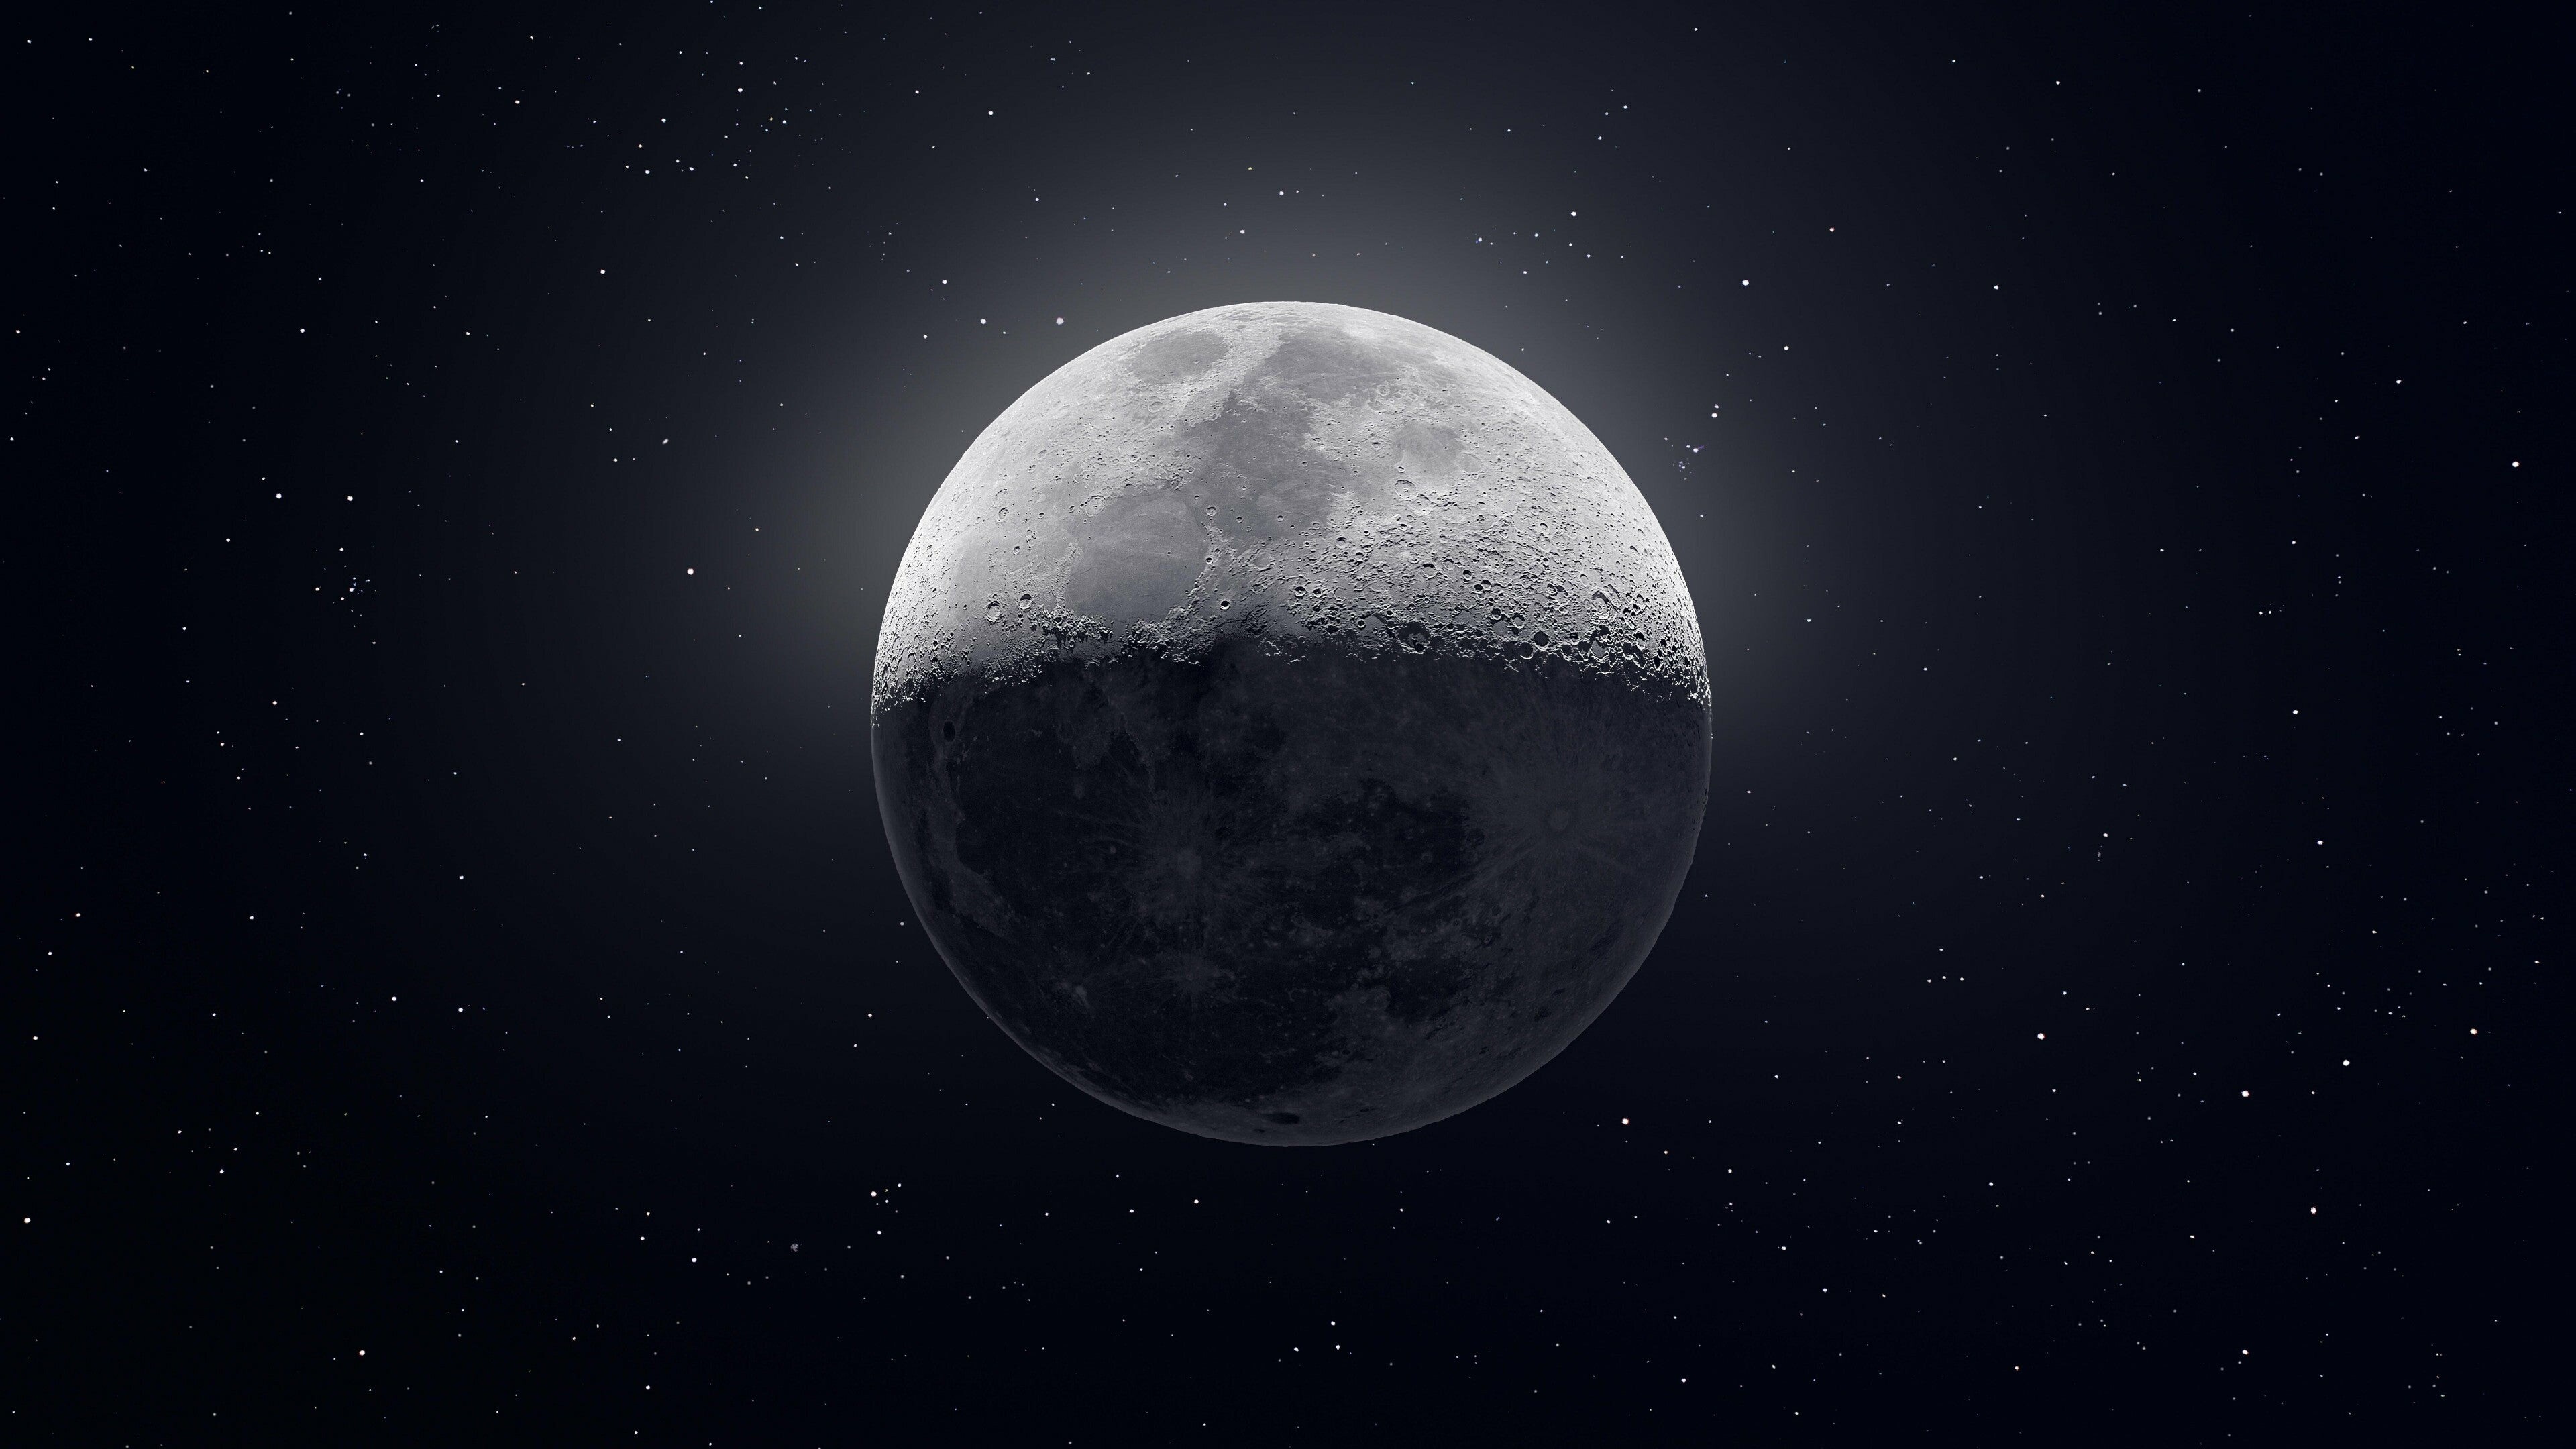 Moon: Earth's only natural satellite, Goes around the Earth at a distance of about 239,000 miles. 3840x2160 4K Wallpaper.